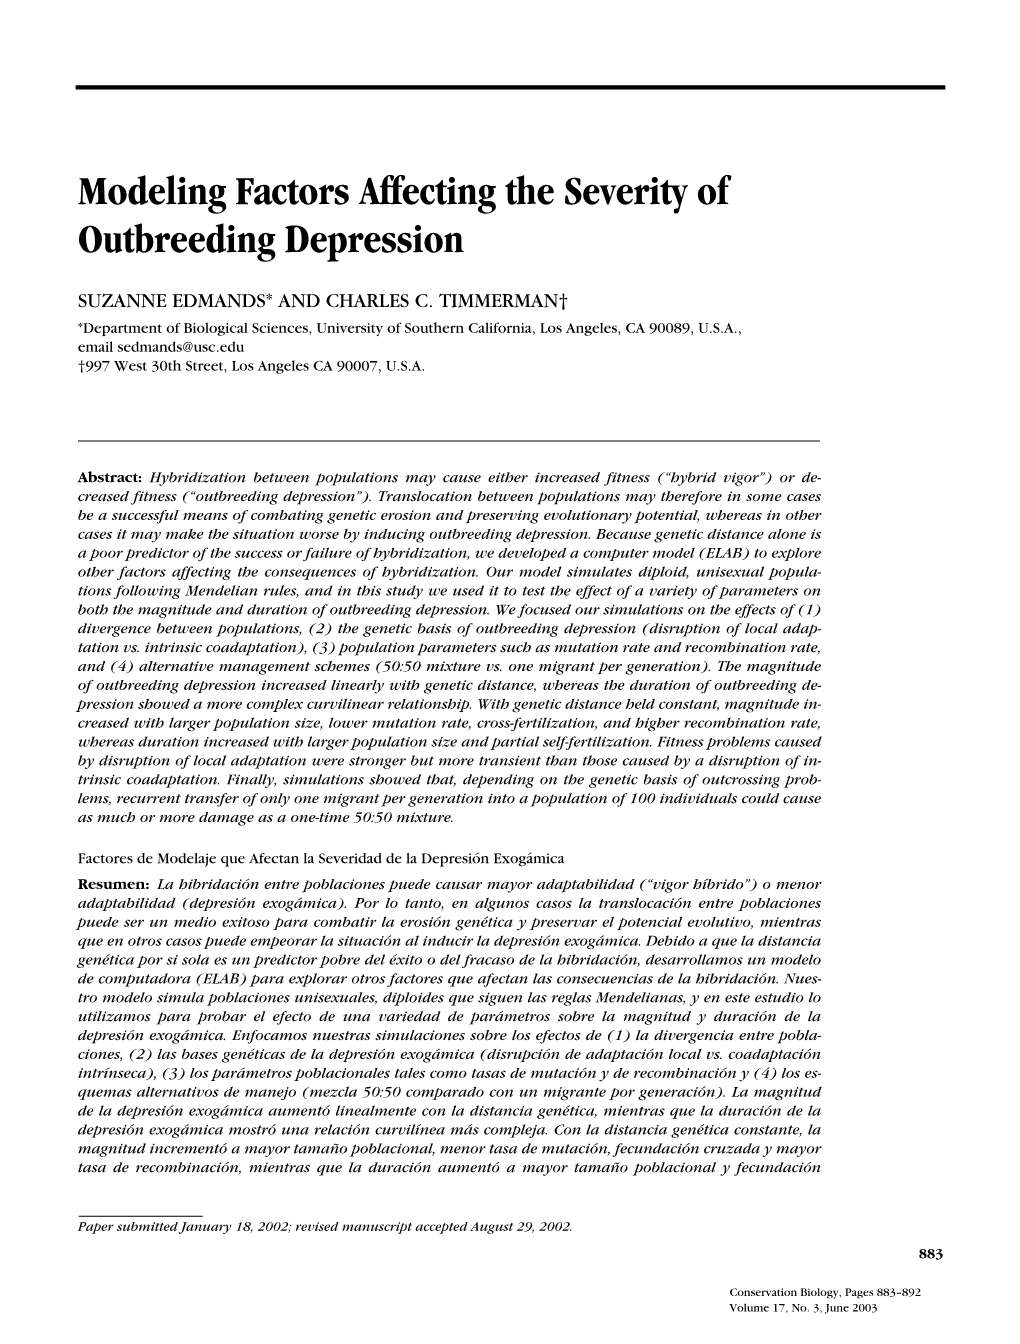 Modeling Factors Affecting the Severity of Outbreeding Depression